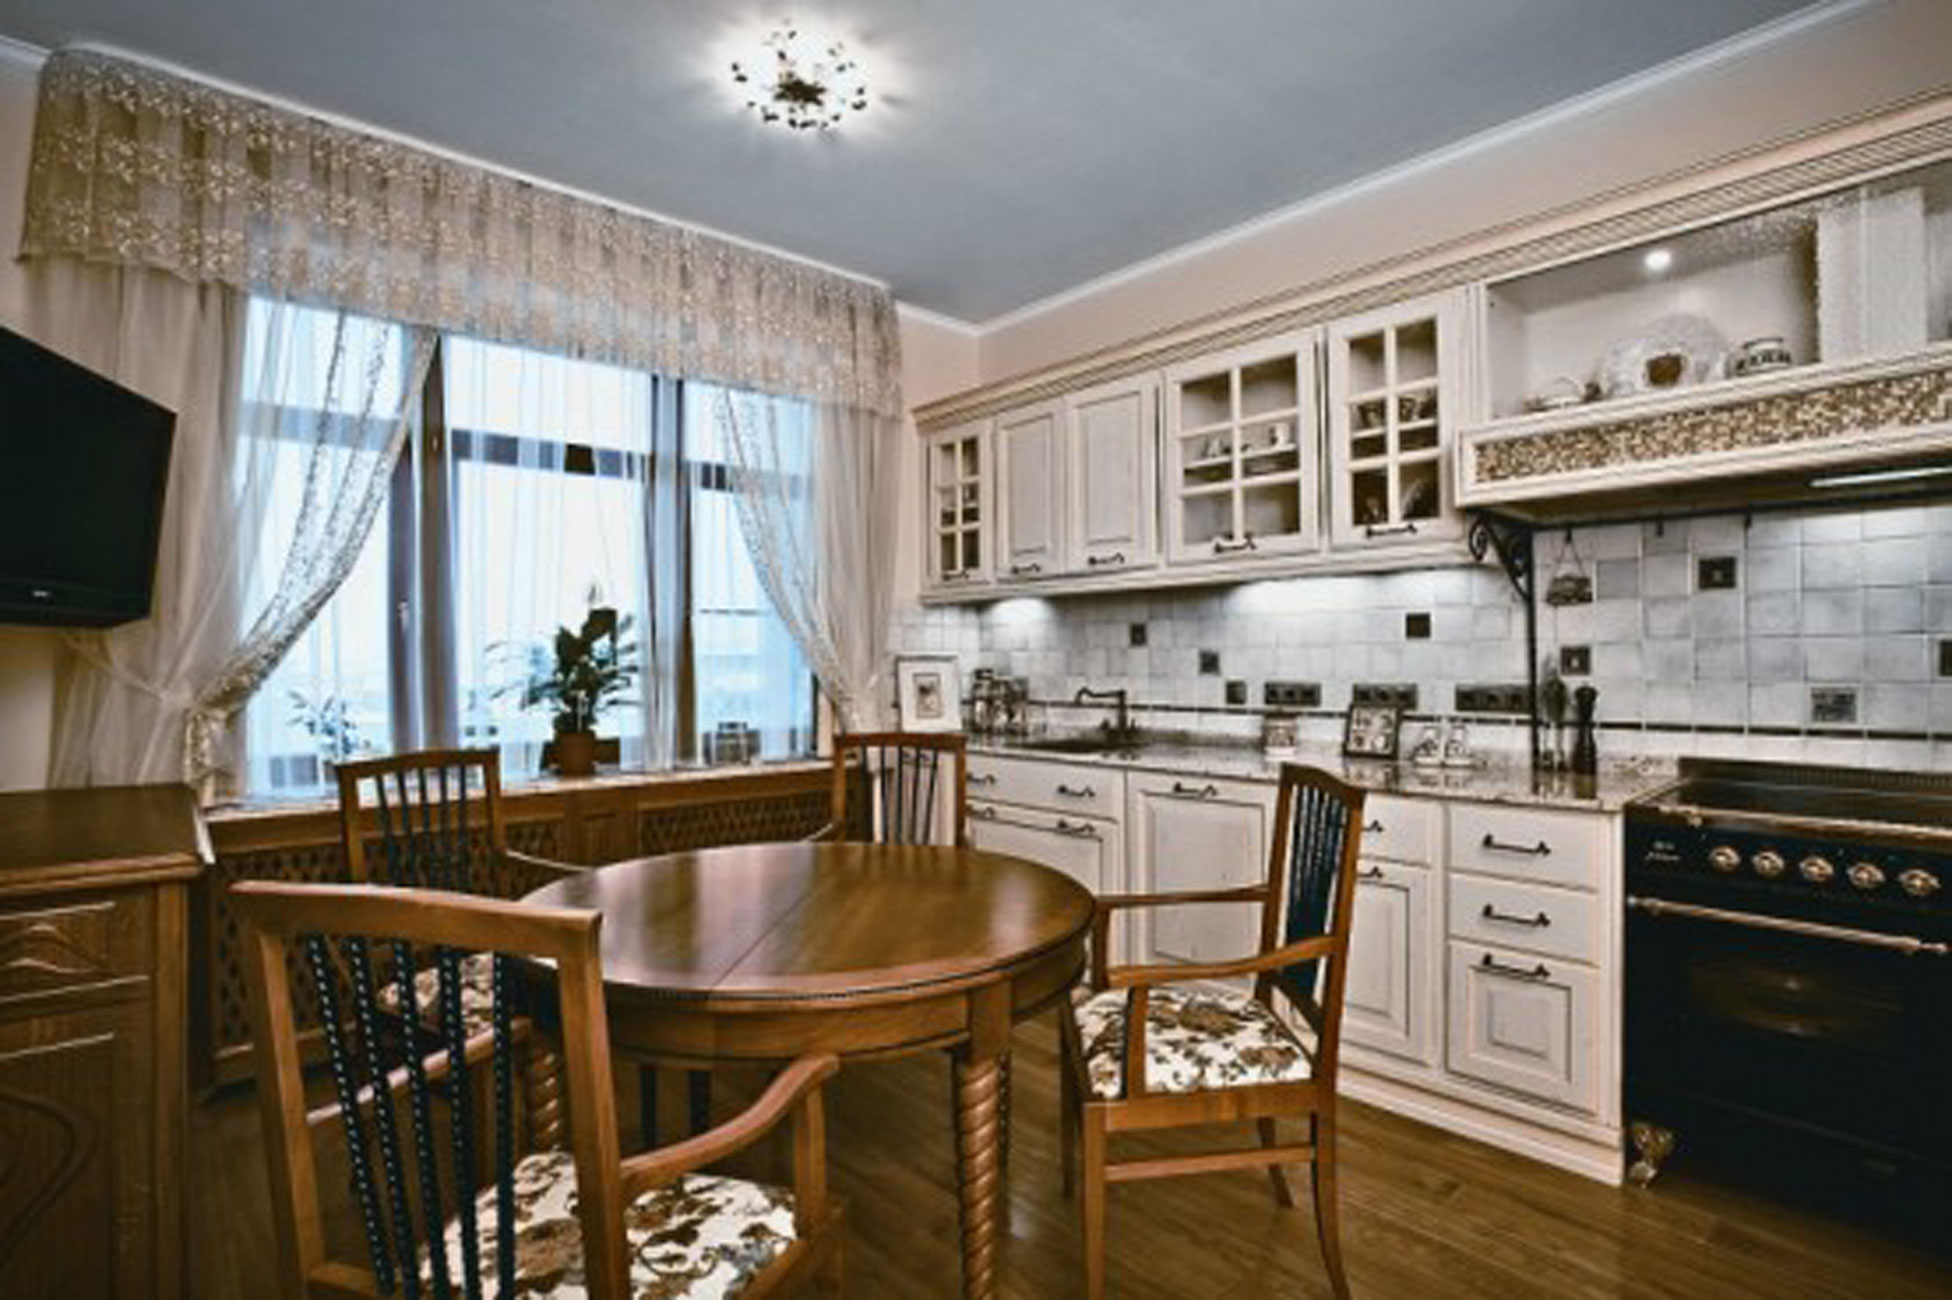 Classic and Elegant Apartment with Floral Decoration in Moscow ...